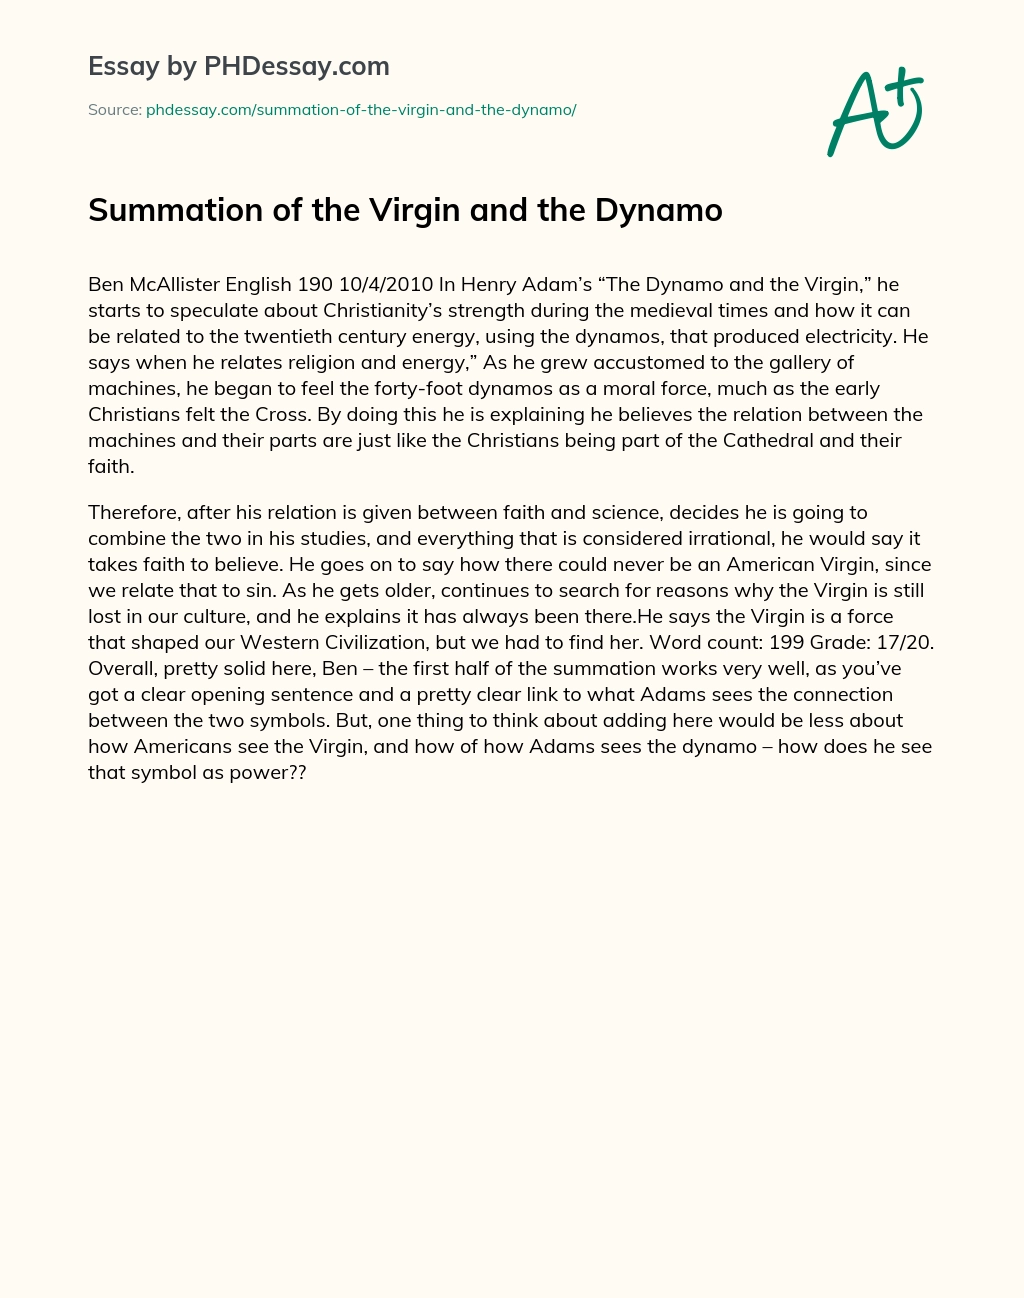 Summation of the Virgin and the Dynamo essay